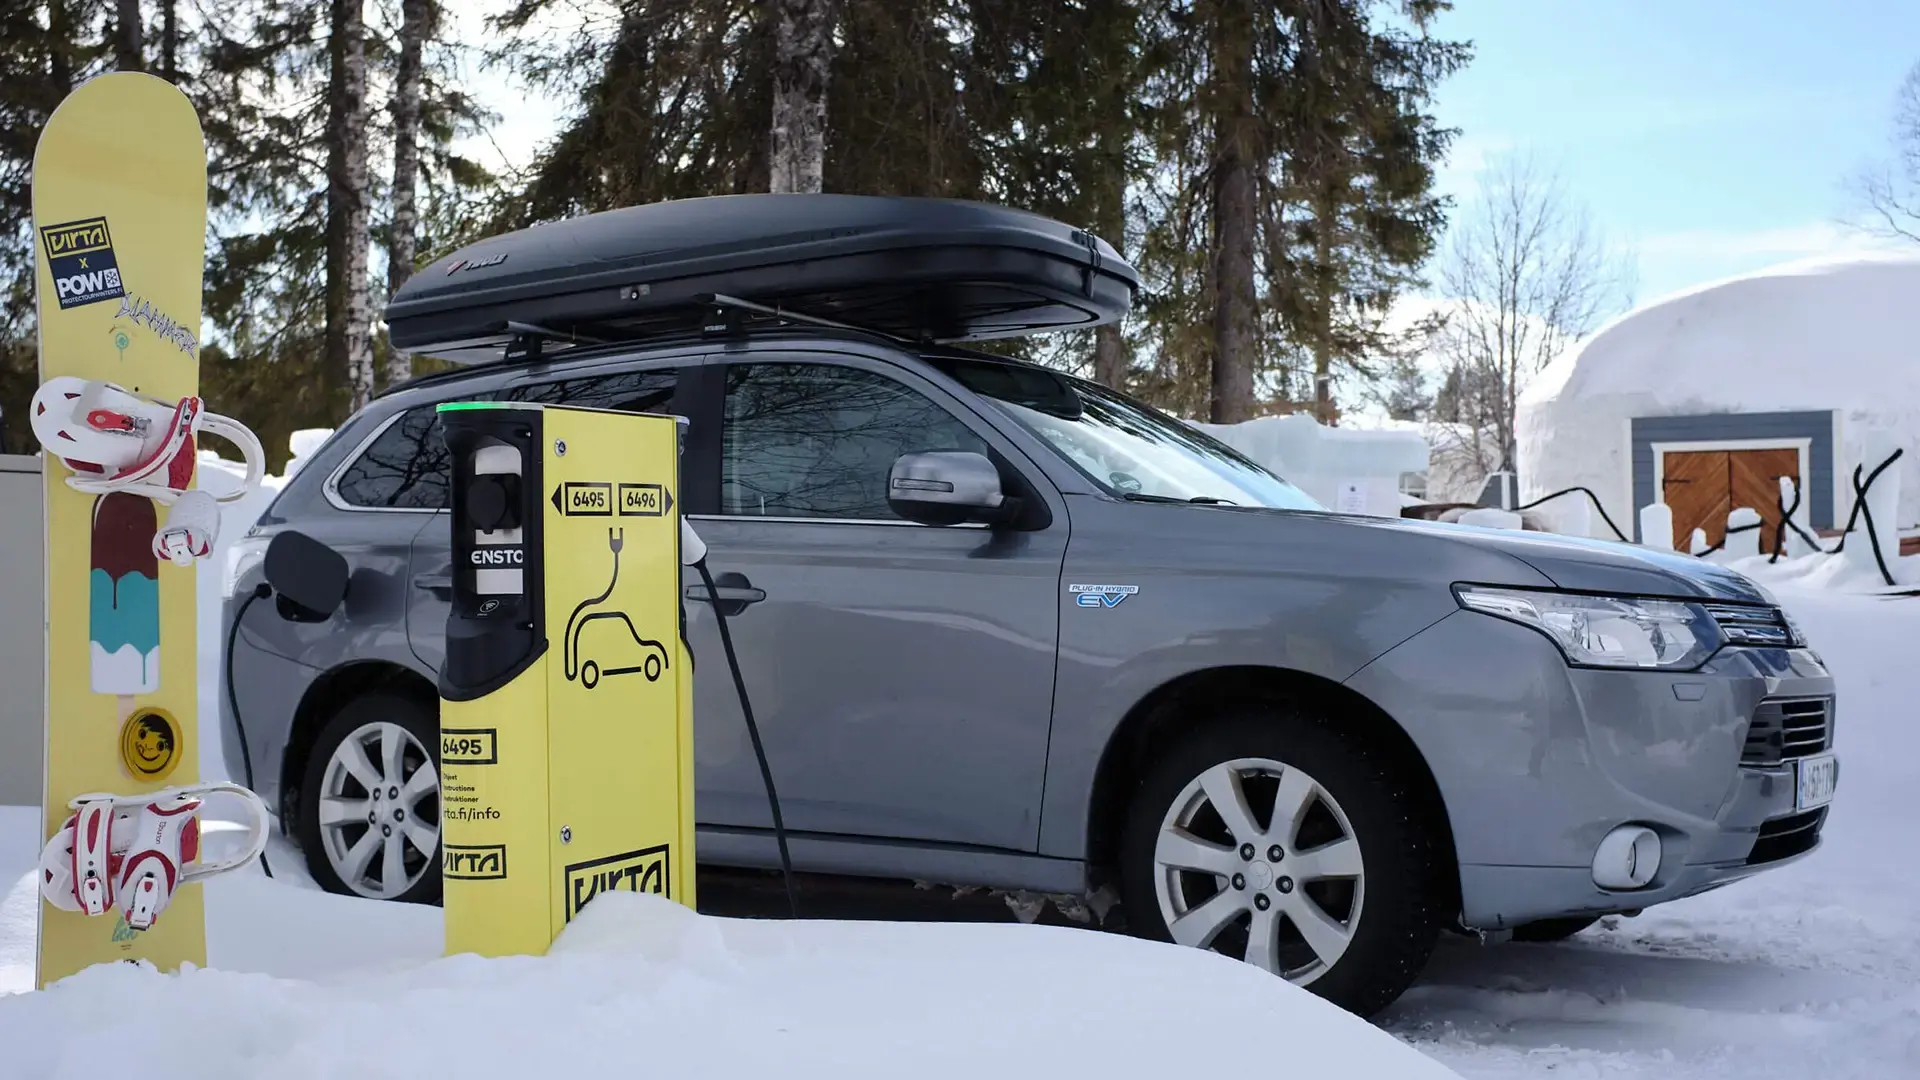 Grey car charging at Virta charger next to a snowboard in snow